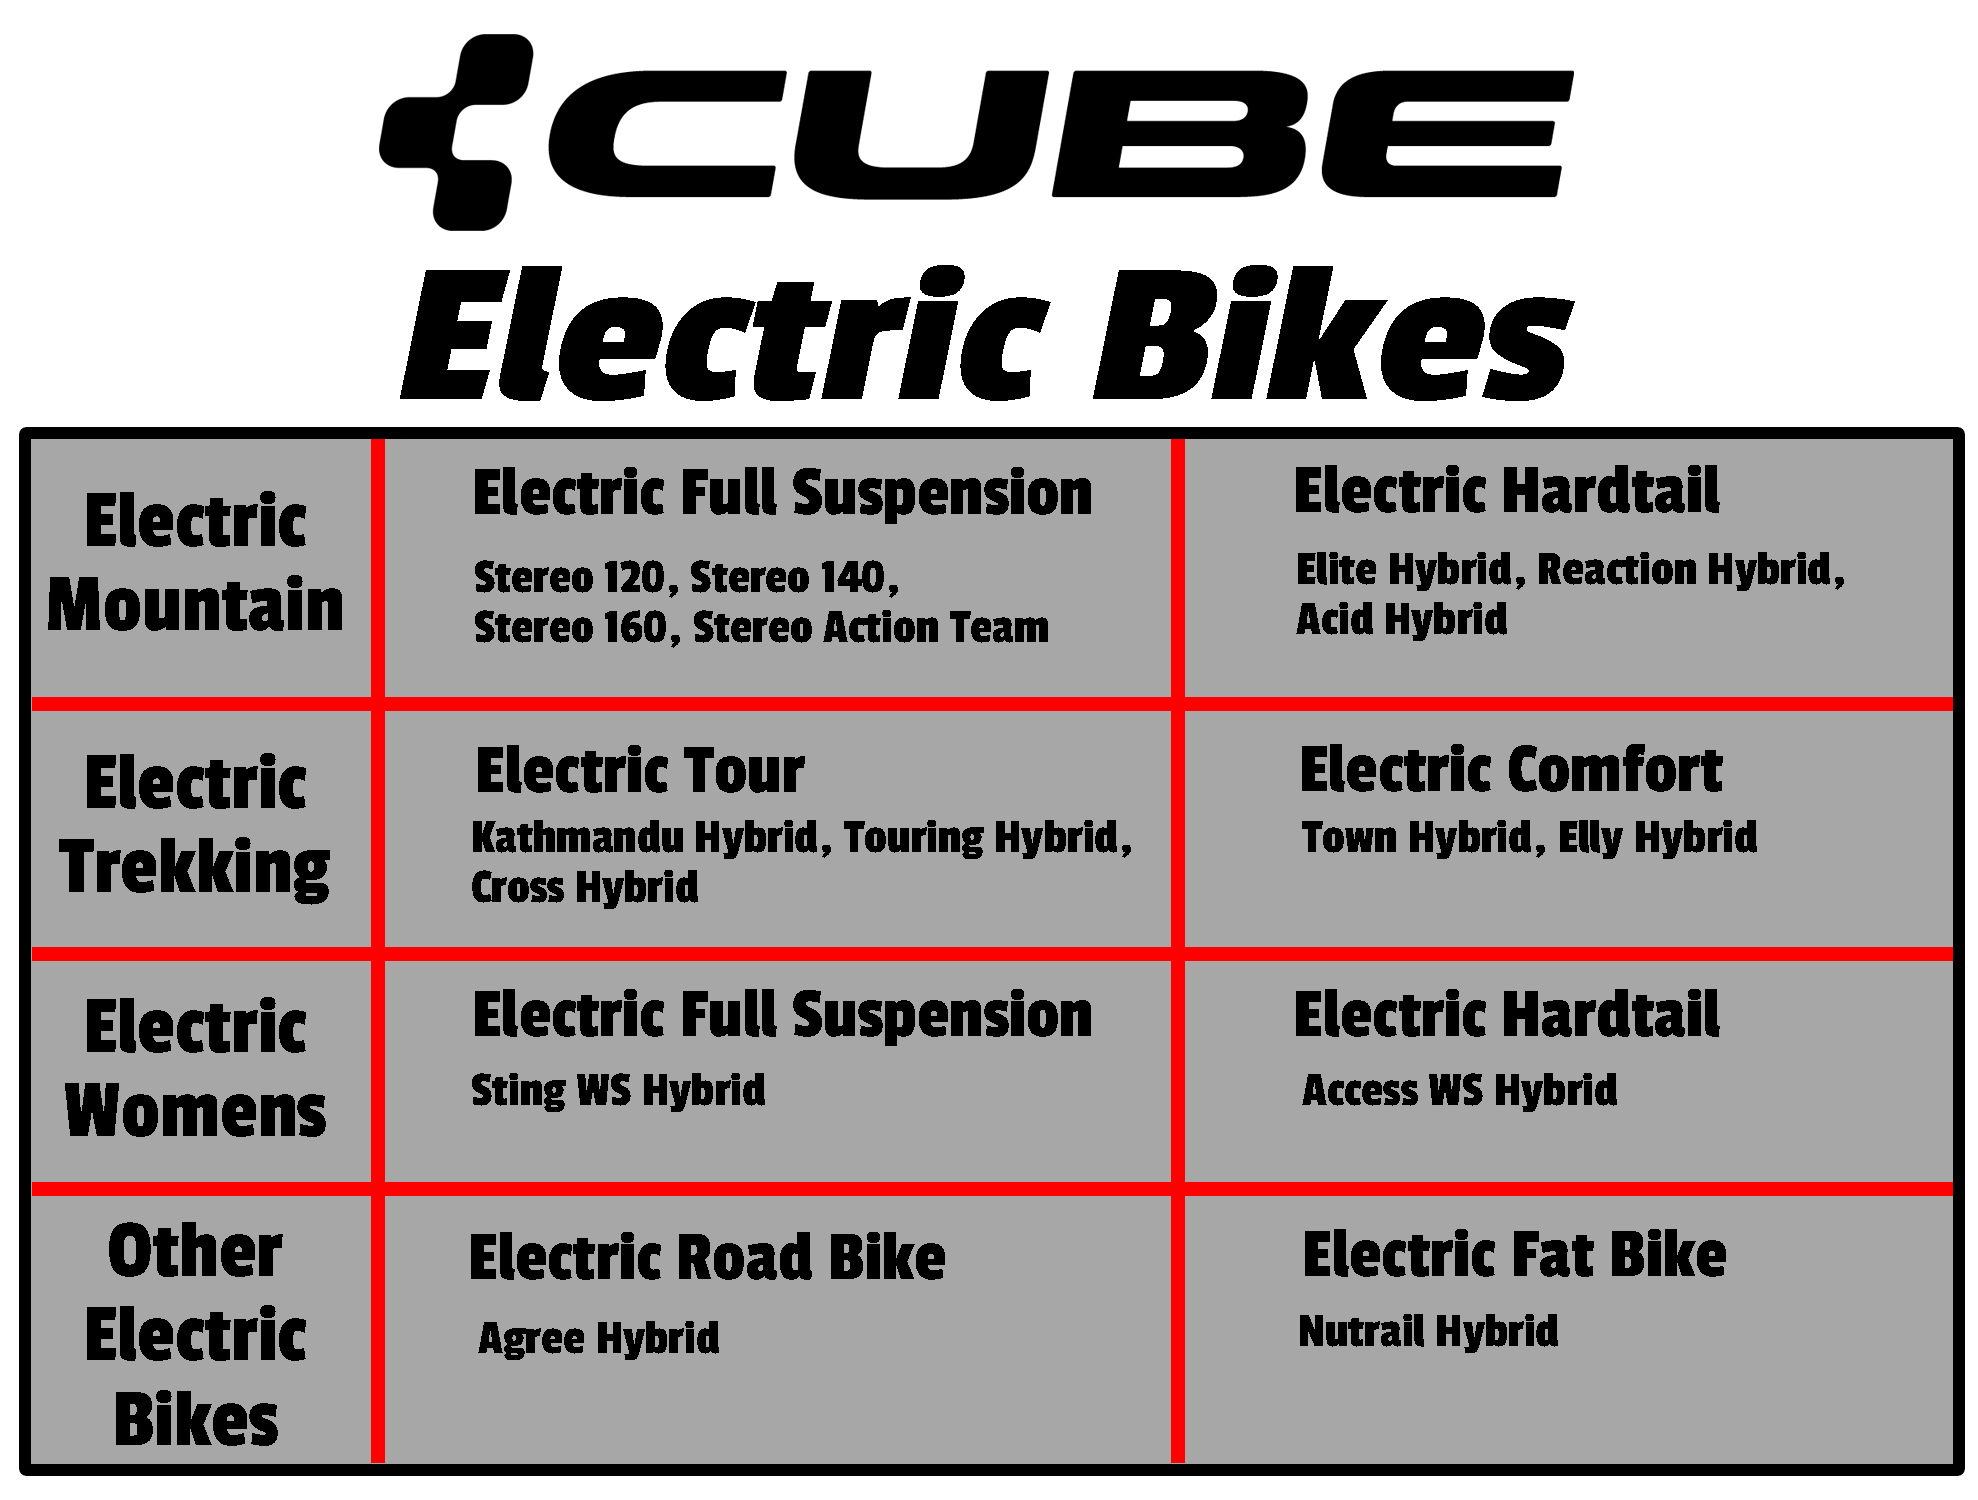 cube-electric-bikes-range-guide-and-information-chart-mtb-monster.jpg